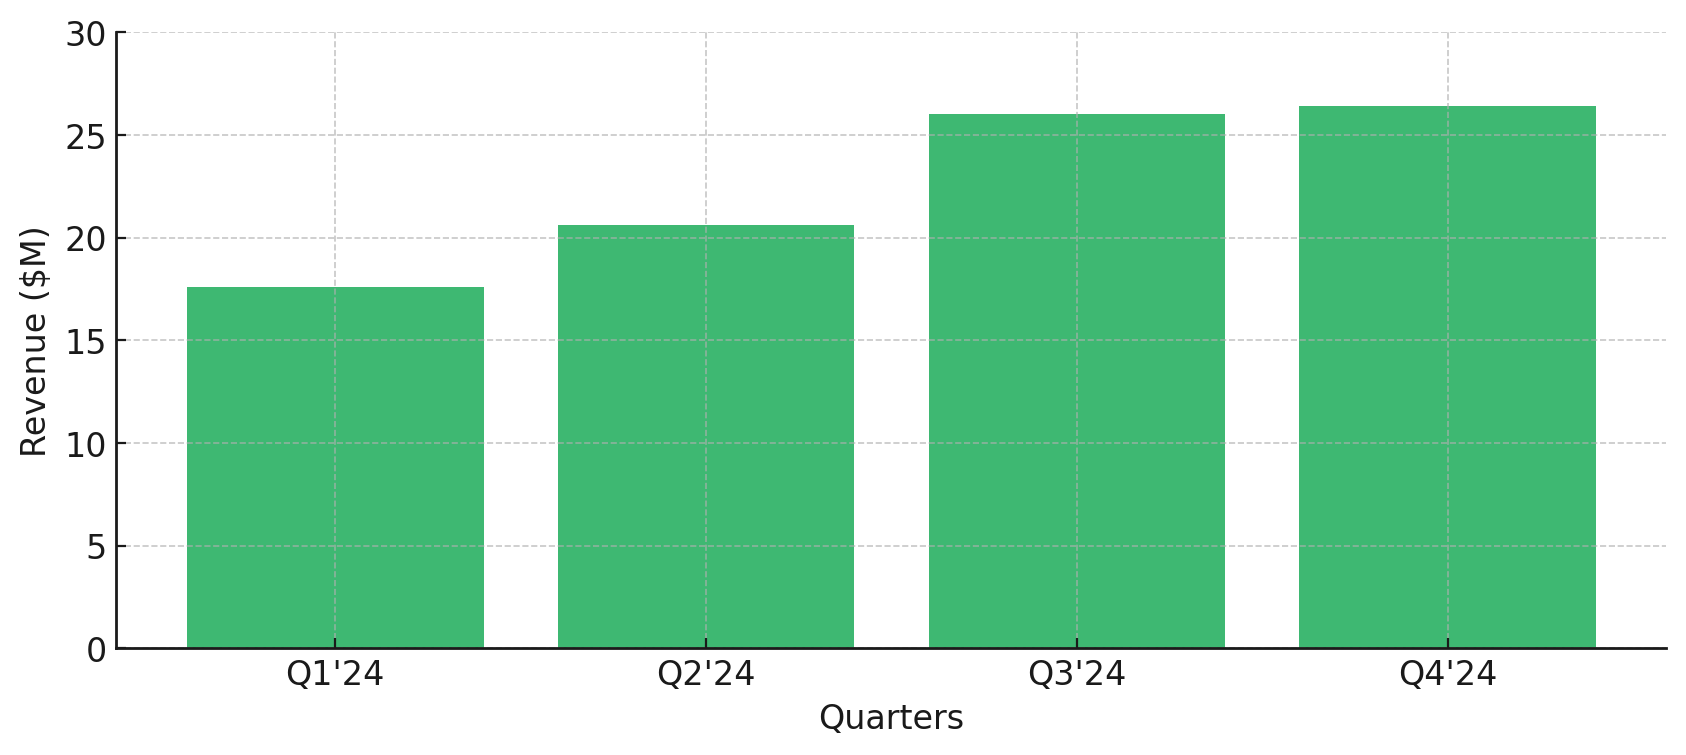 oesx revenue by quarter 2024 fy.png